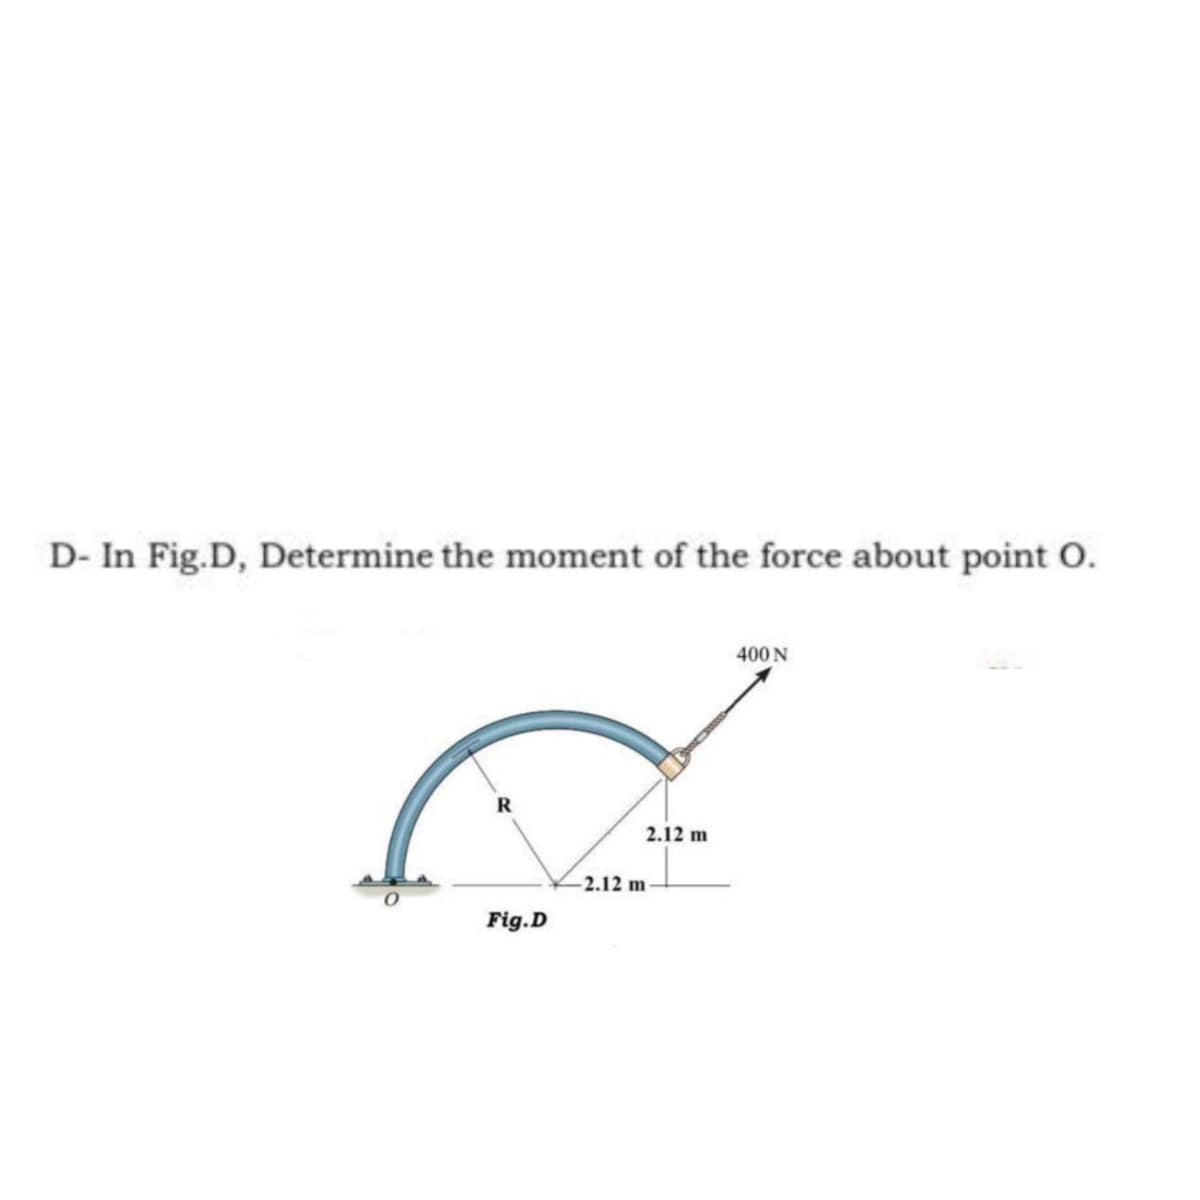 D- In Fig.D, Determine the moment of the force about point O.
400 N
2.12 m
2.12 m
Fig.D
